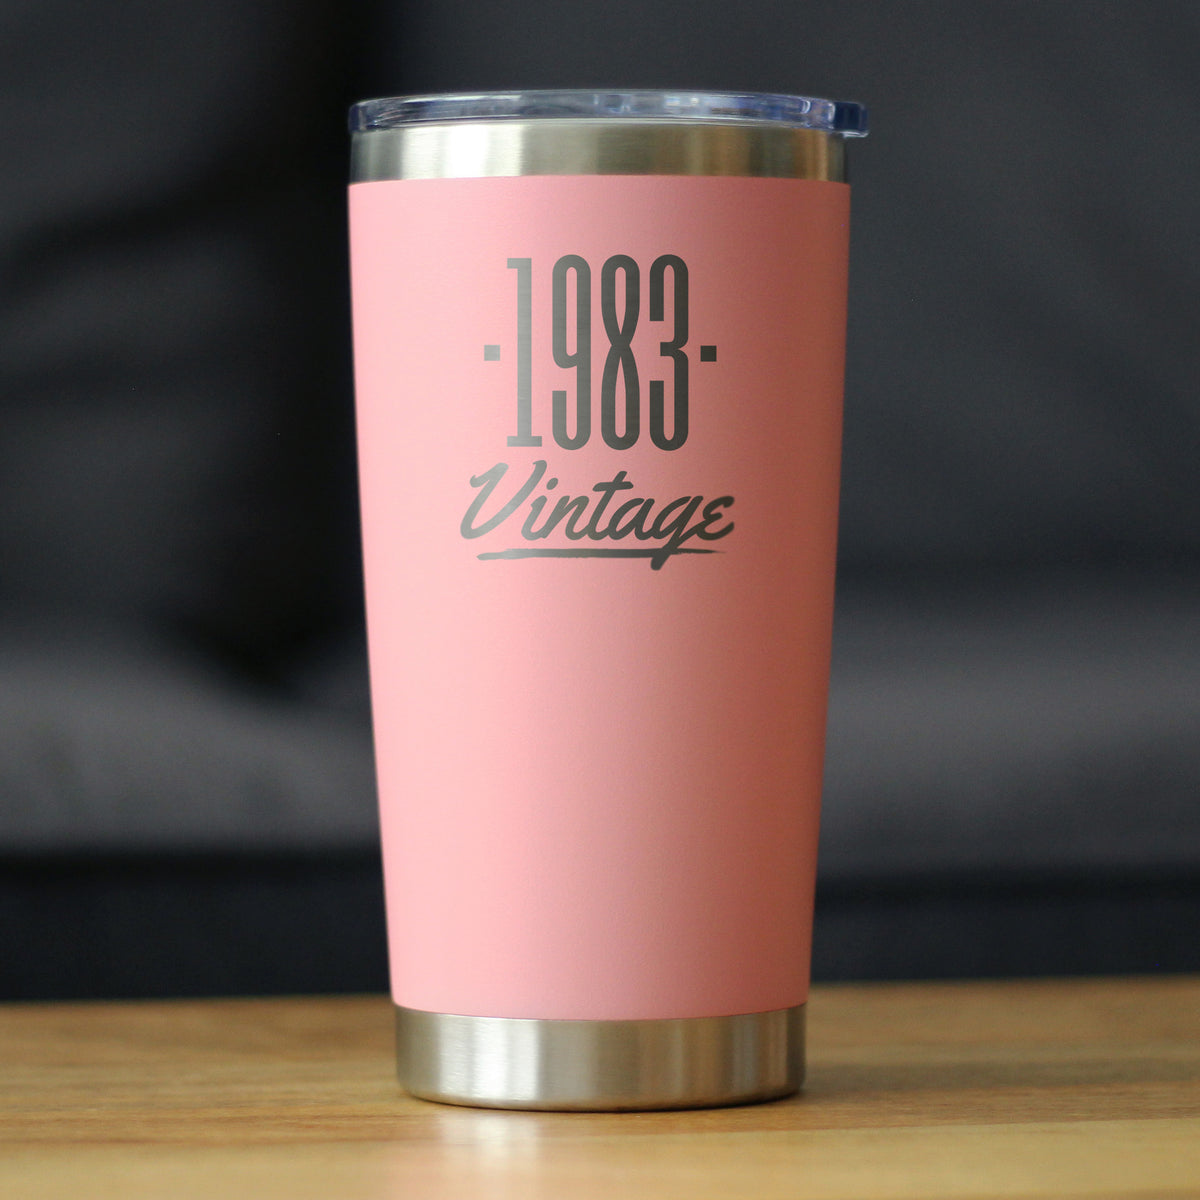 Vintage 1983 - Insulated Coffee Tumbler Cup with Sliding Lid - 20 oz - Funny 41st Birthday Gift for Women or Men Turning 41